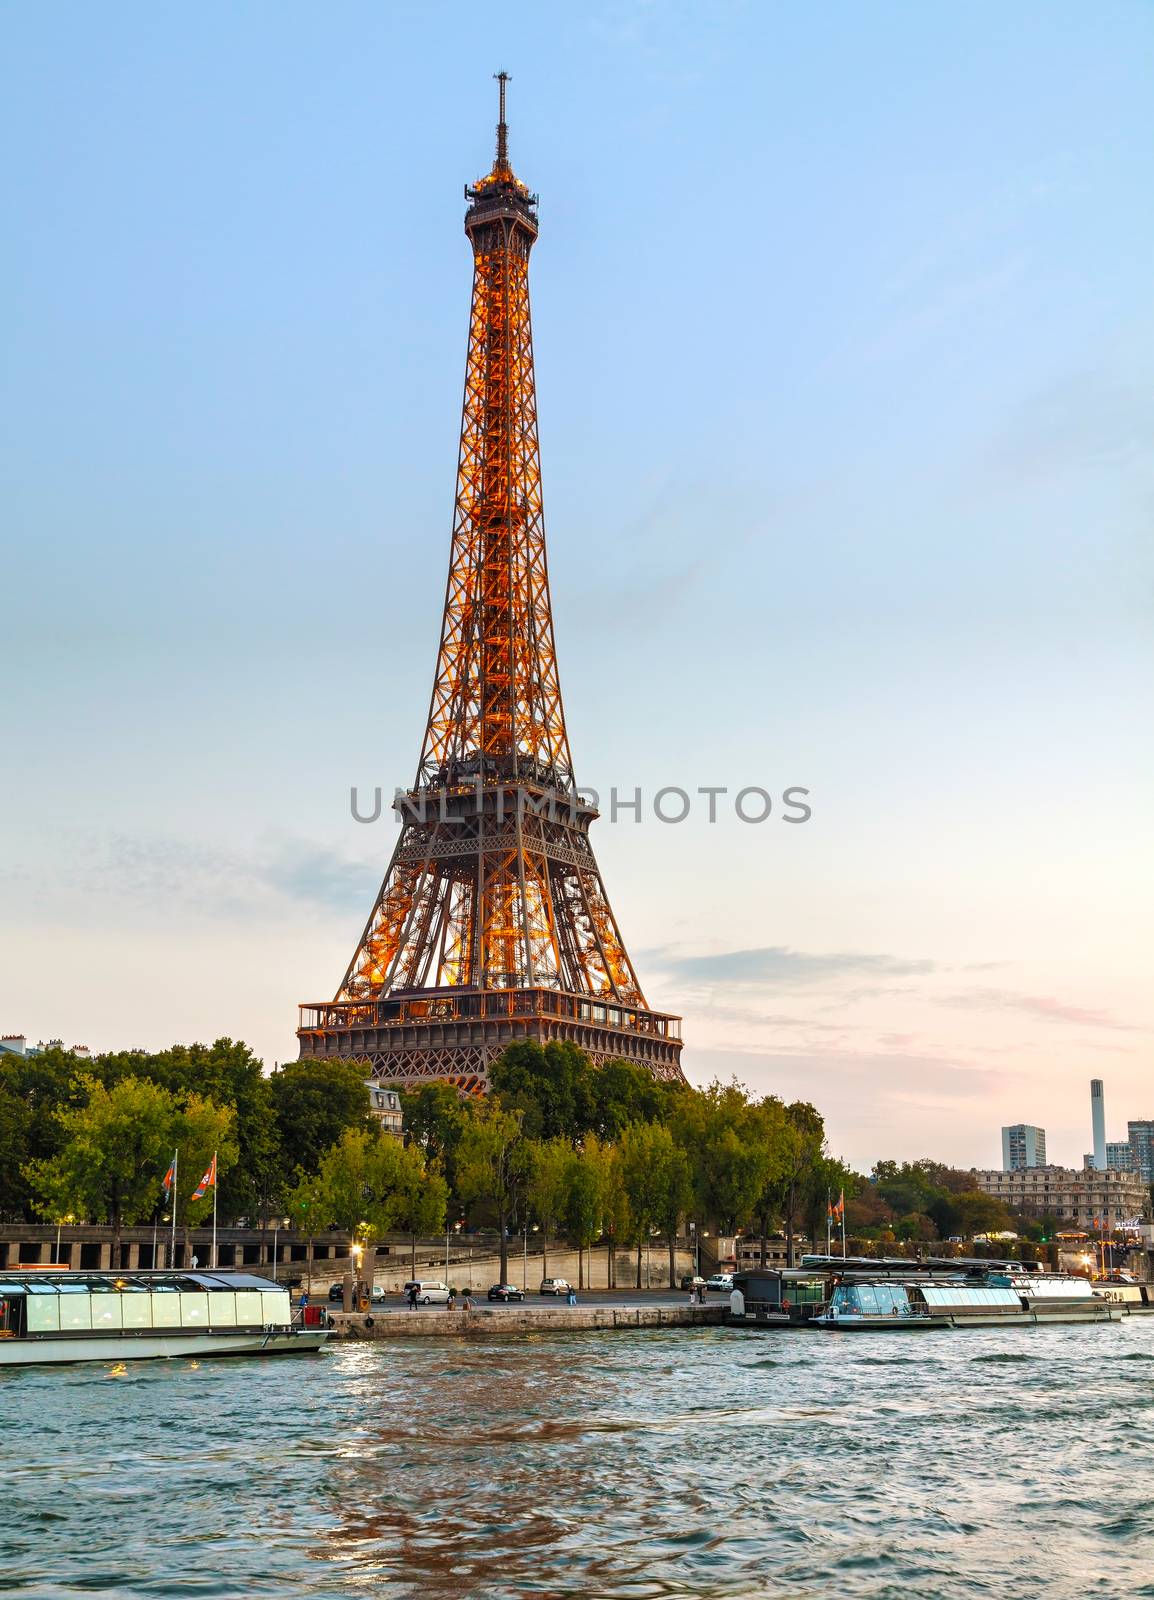 PARIS - OCTOBER 9: Paris cityscape with Eiffel tower on October 9, 2014 in Paris, France. It's an iron lattice tower located on the Champ de Mars and  was named after the engineer Gustave Eiffel.